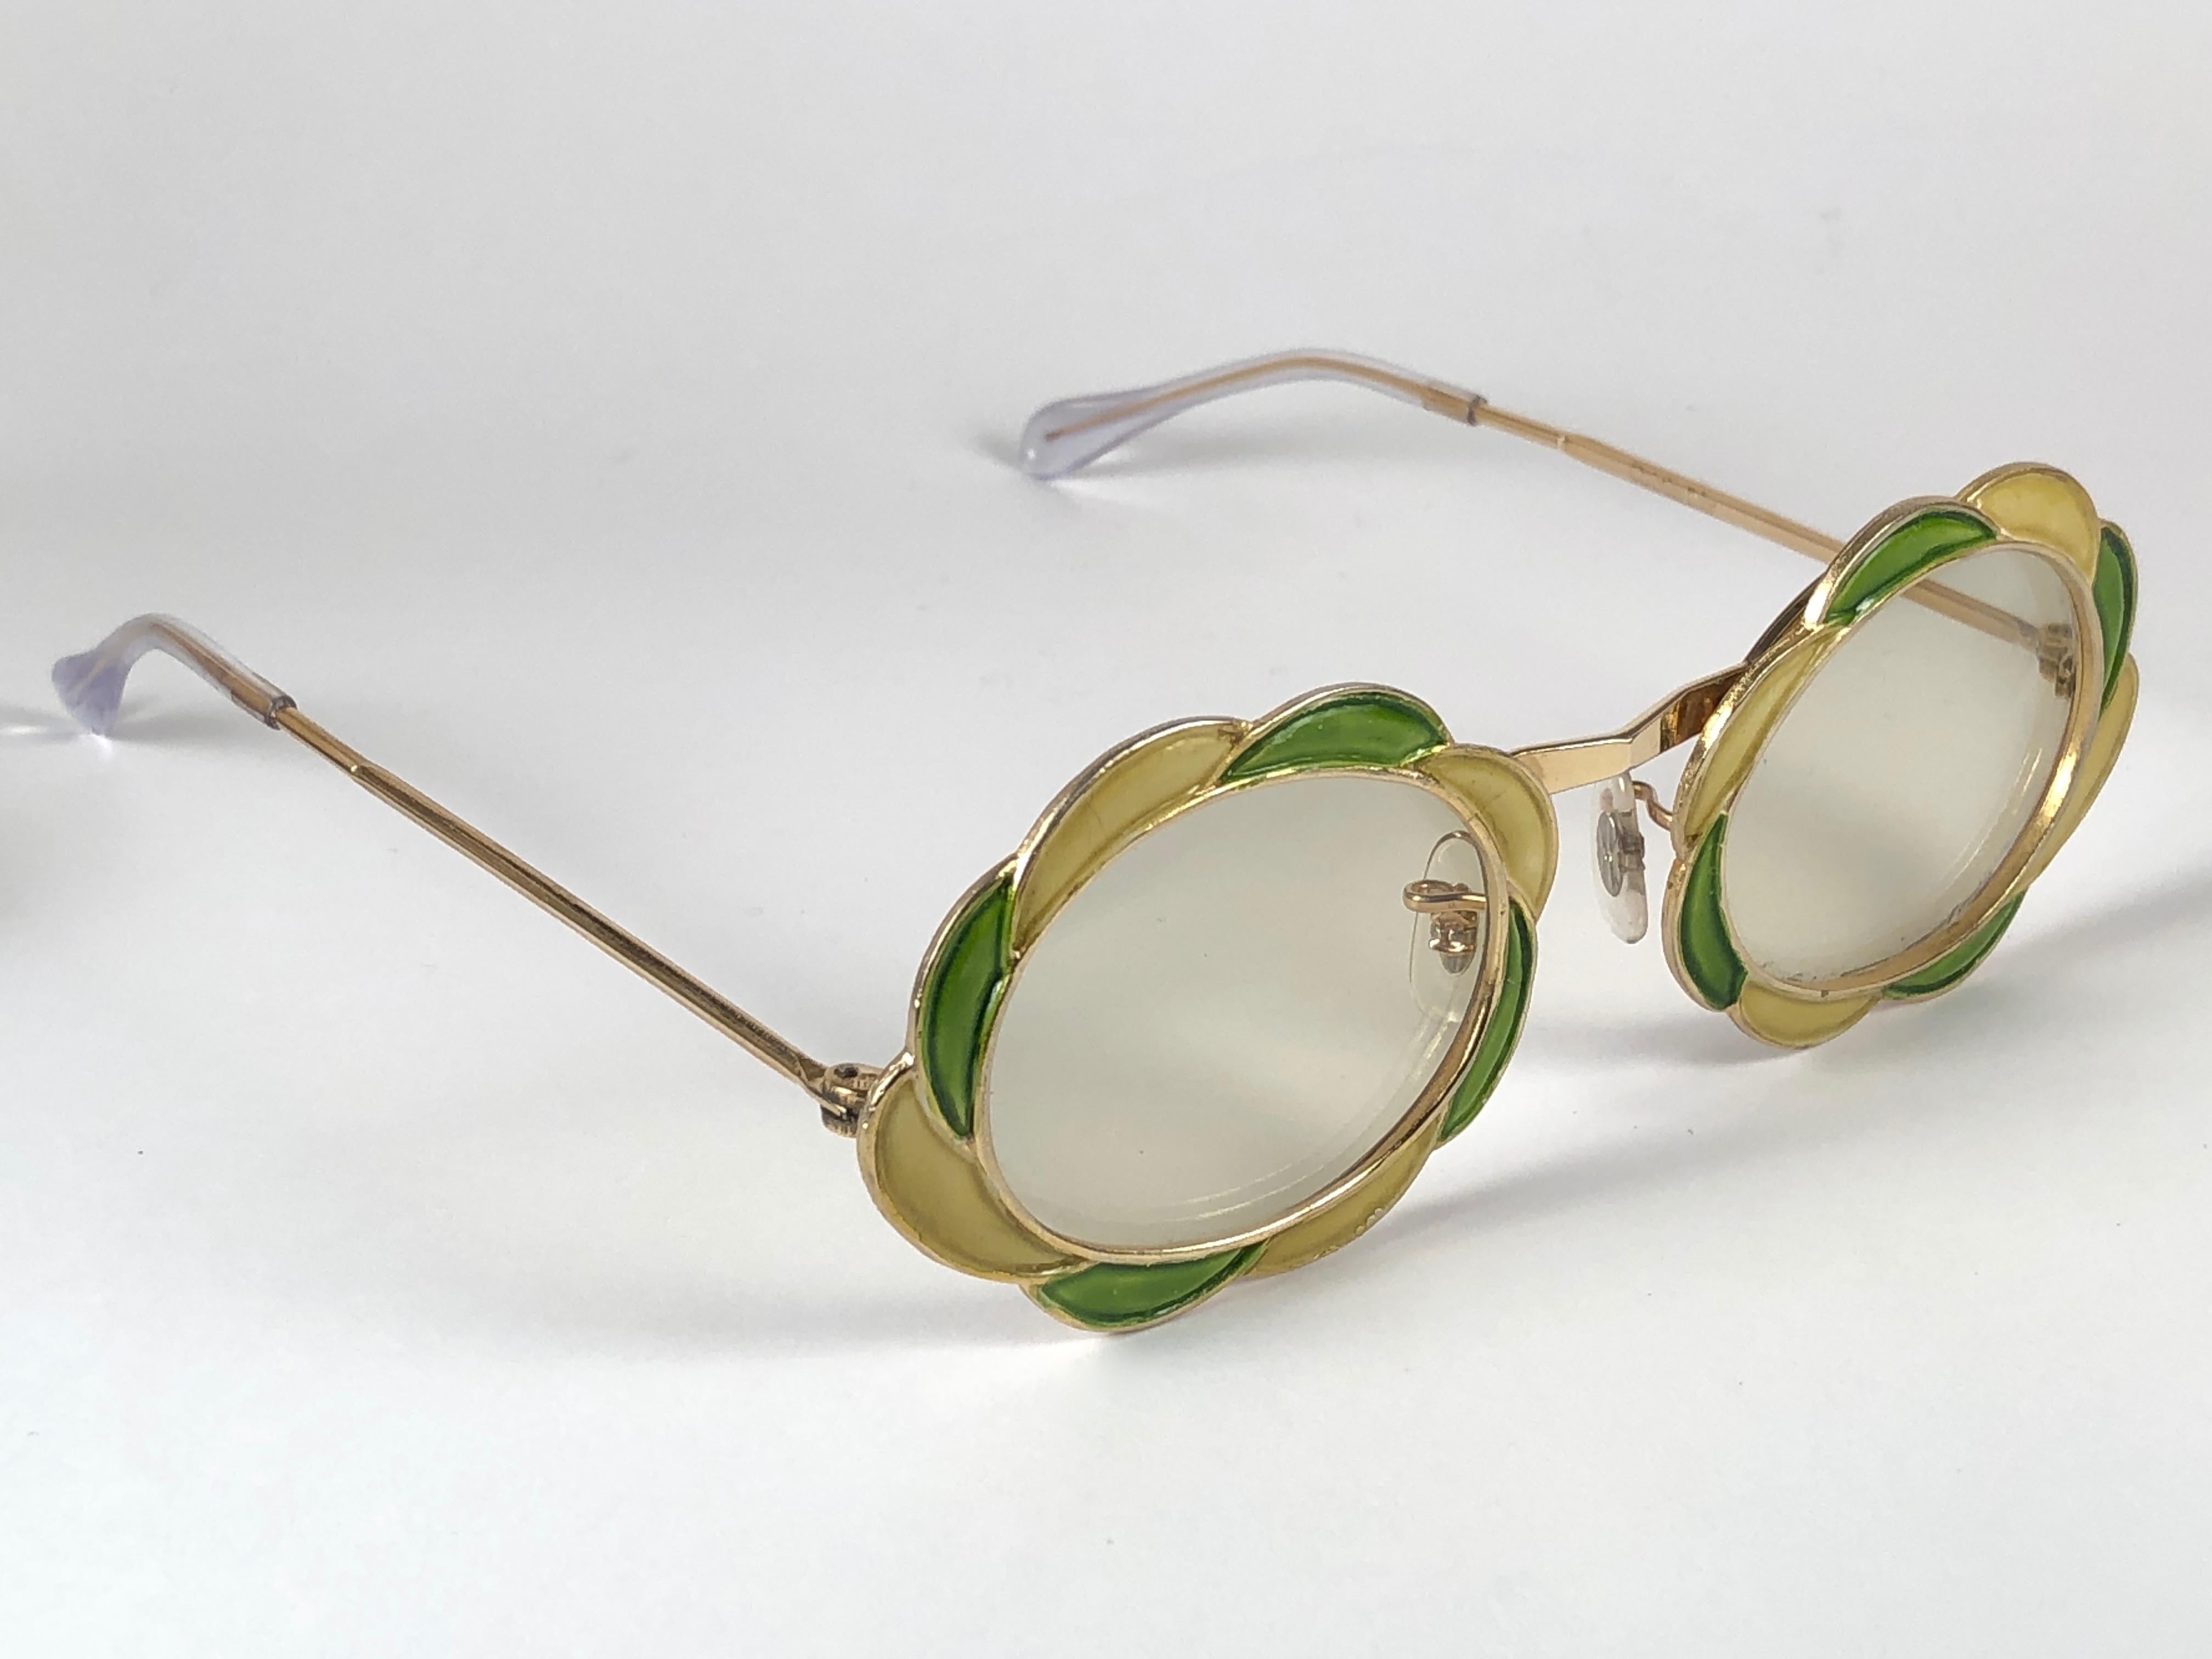 Ultra rare pair of Christian Dior Sunglasses circa 1960's.

This is a seldom and rare piece not only for its aesthetic value but for its importance in the sunglasses and fashion history.   
Delicate enamel o cast iron frame emulating a delicate